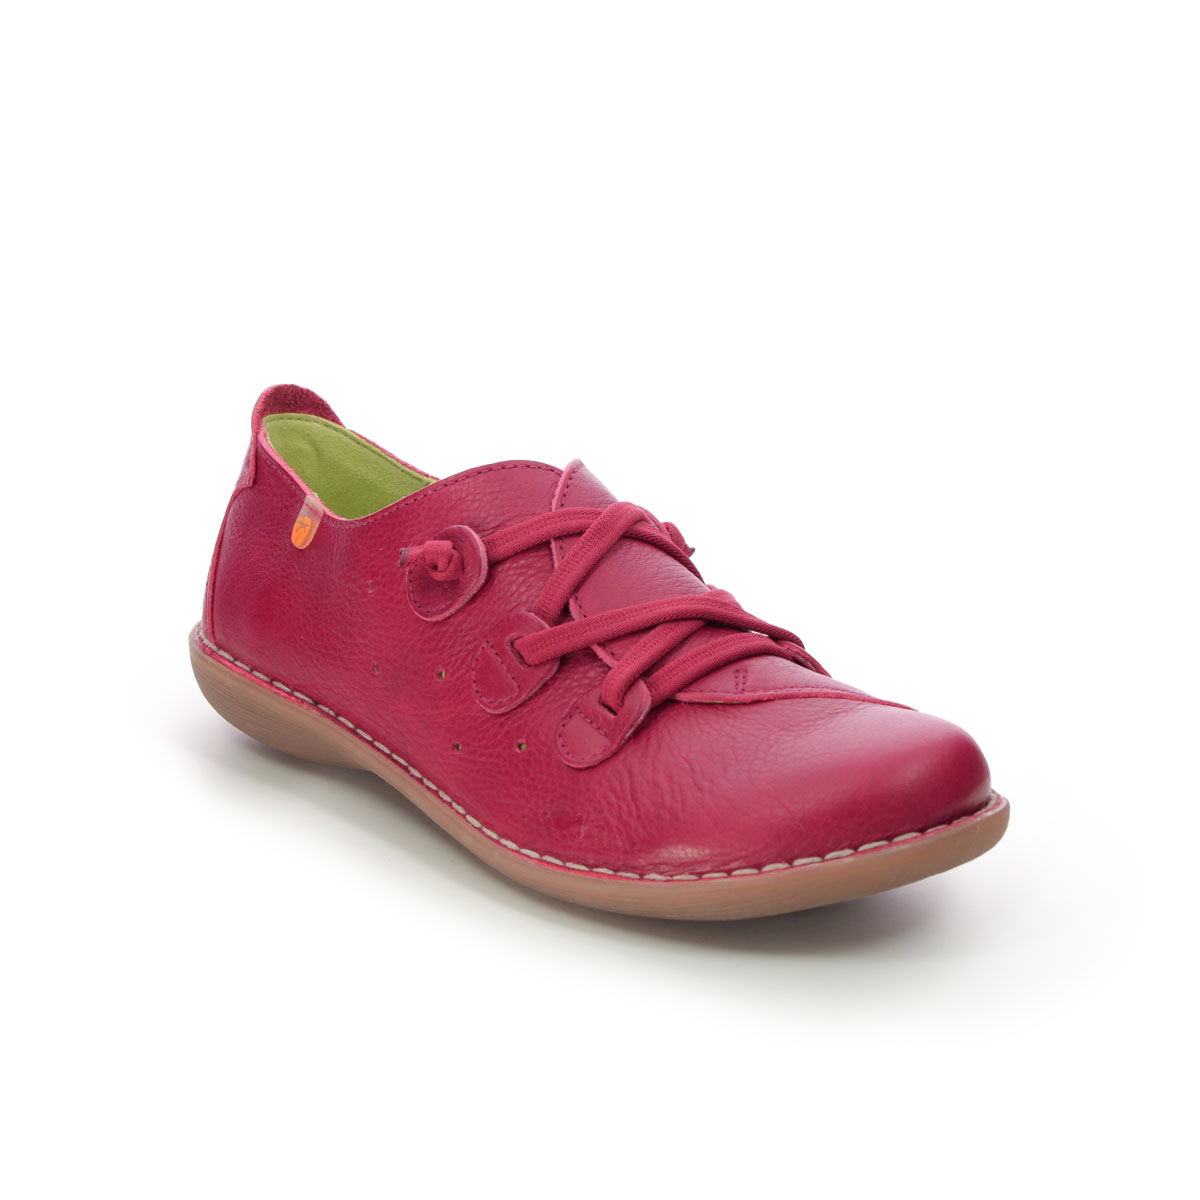 Volharding opwinding ziekte Jungla Cokifol 6023-80 Red leather lacing shoes